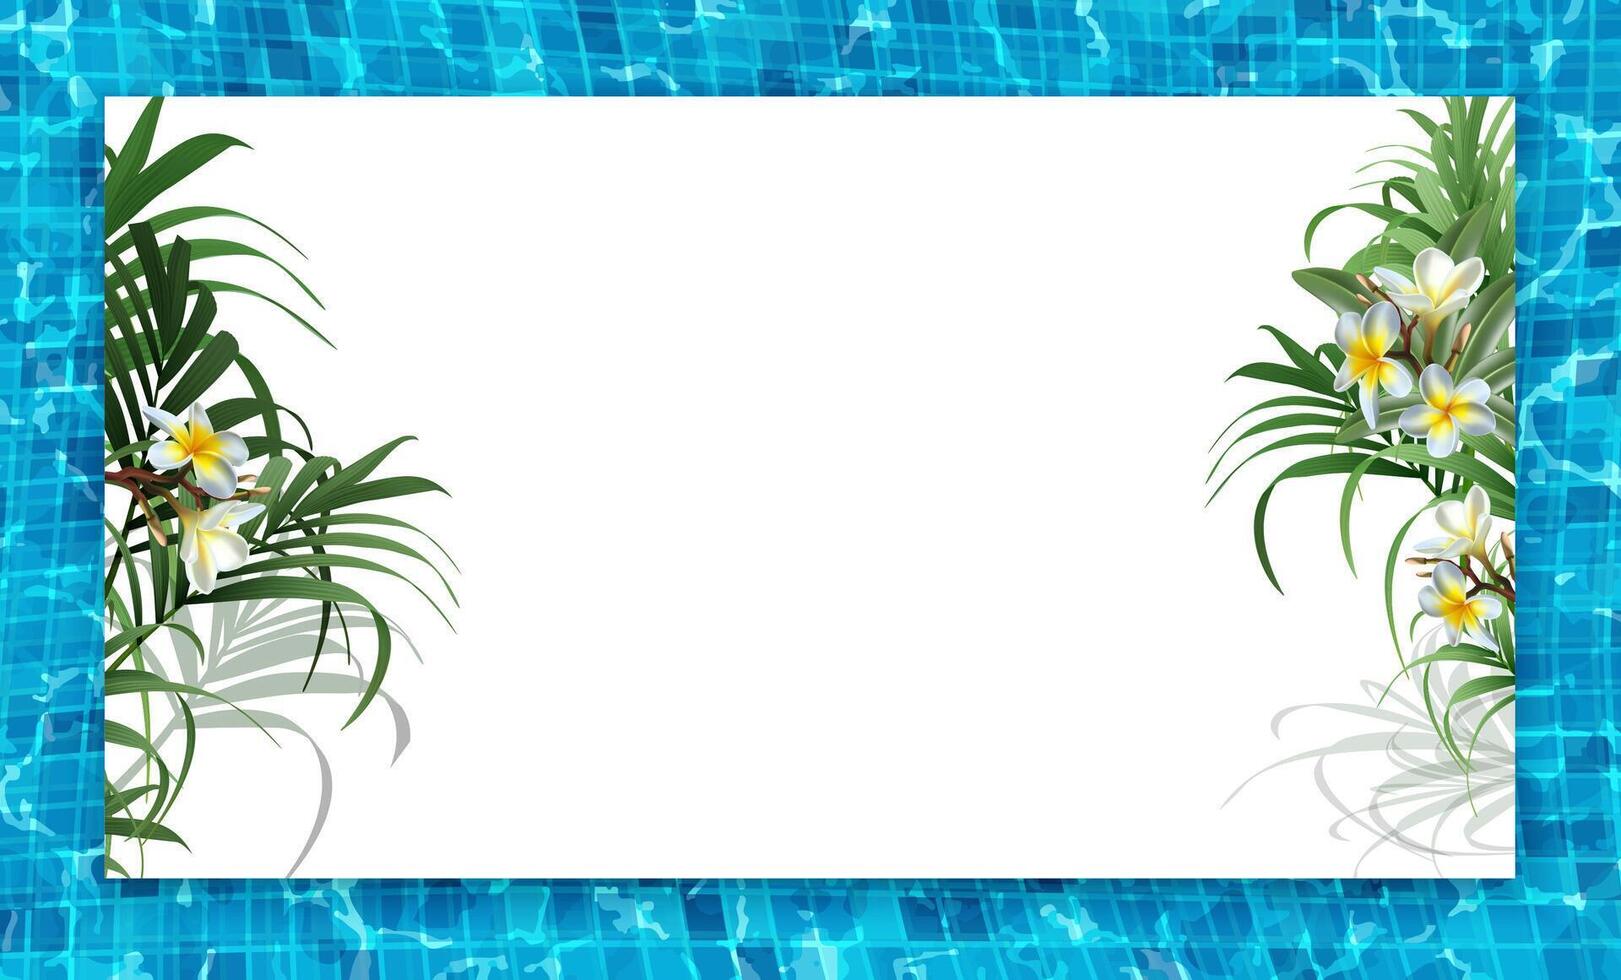 3d realistic vector illustration. Pool party banner with frangipani flowers frame.